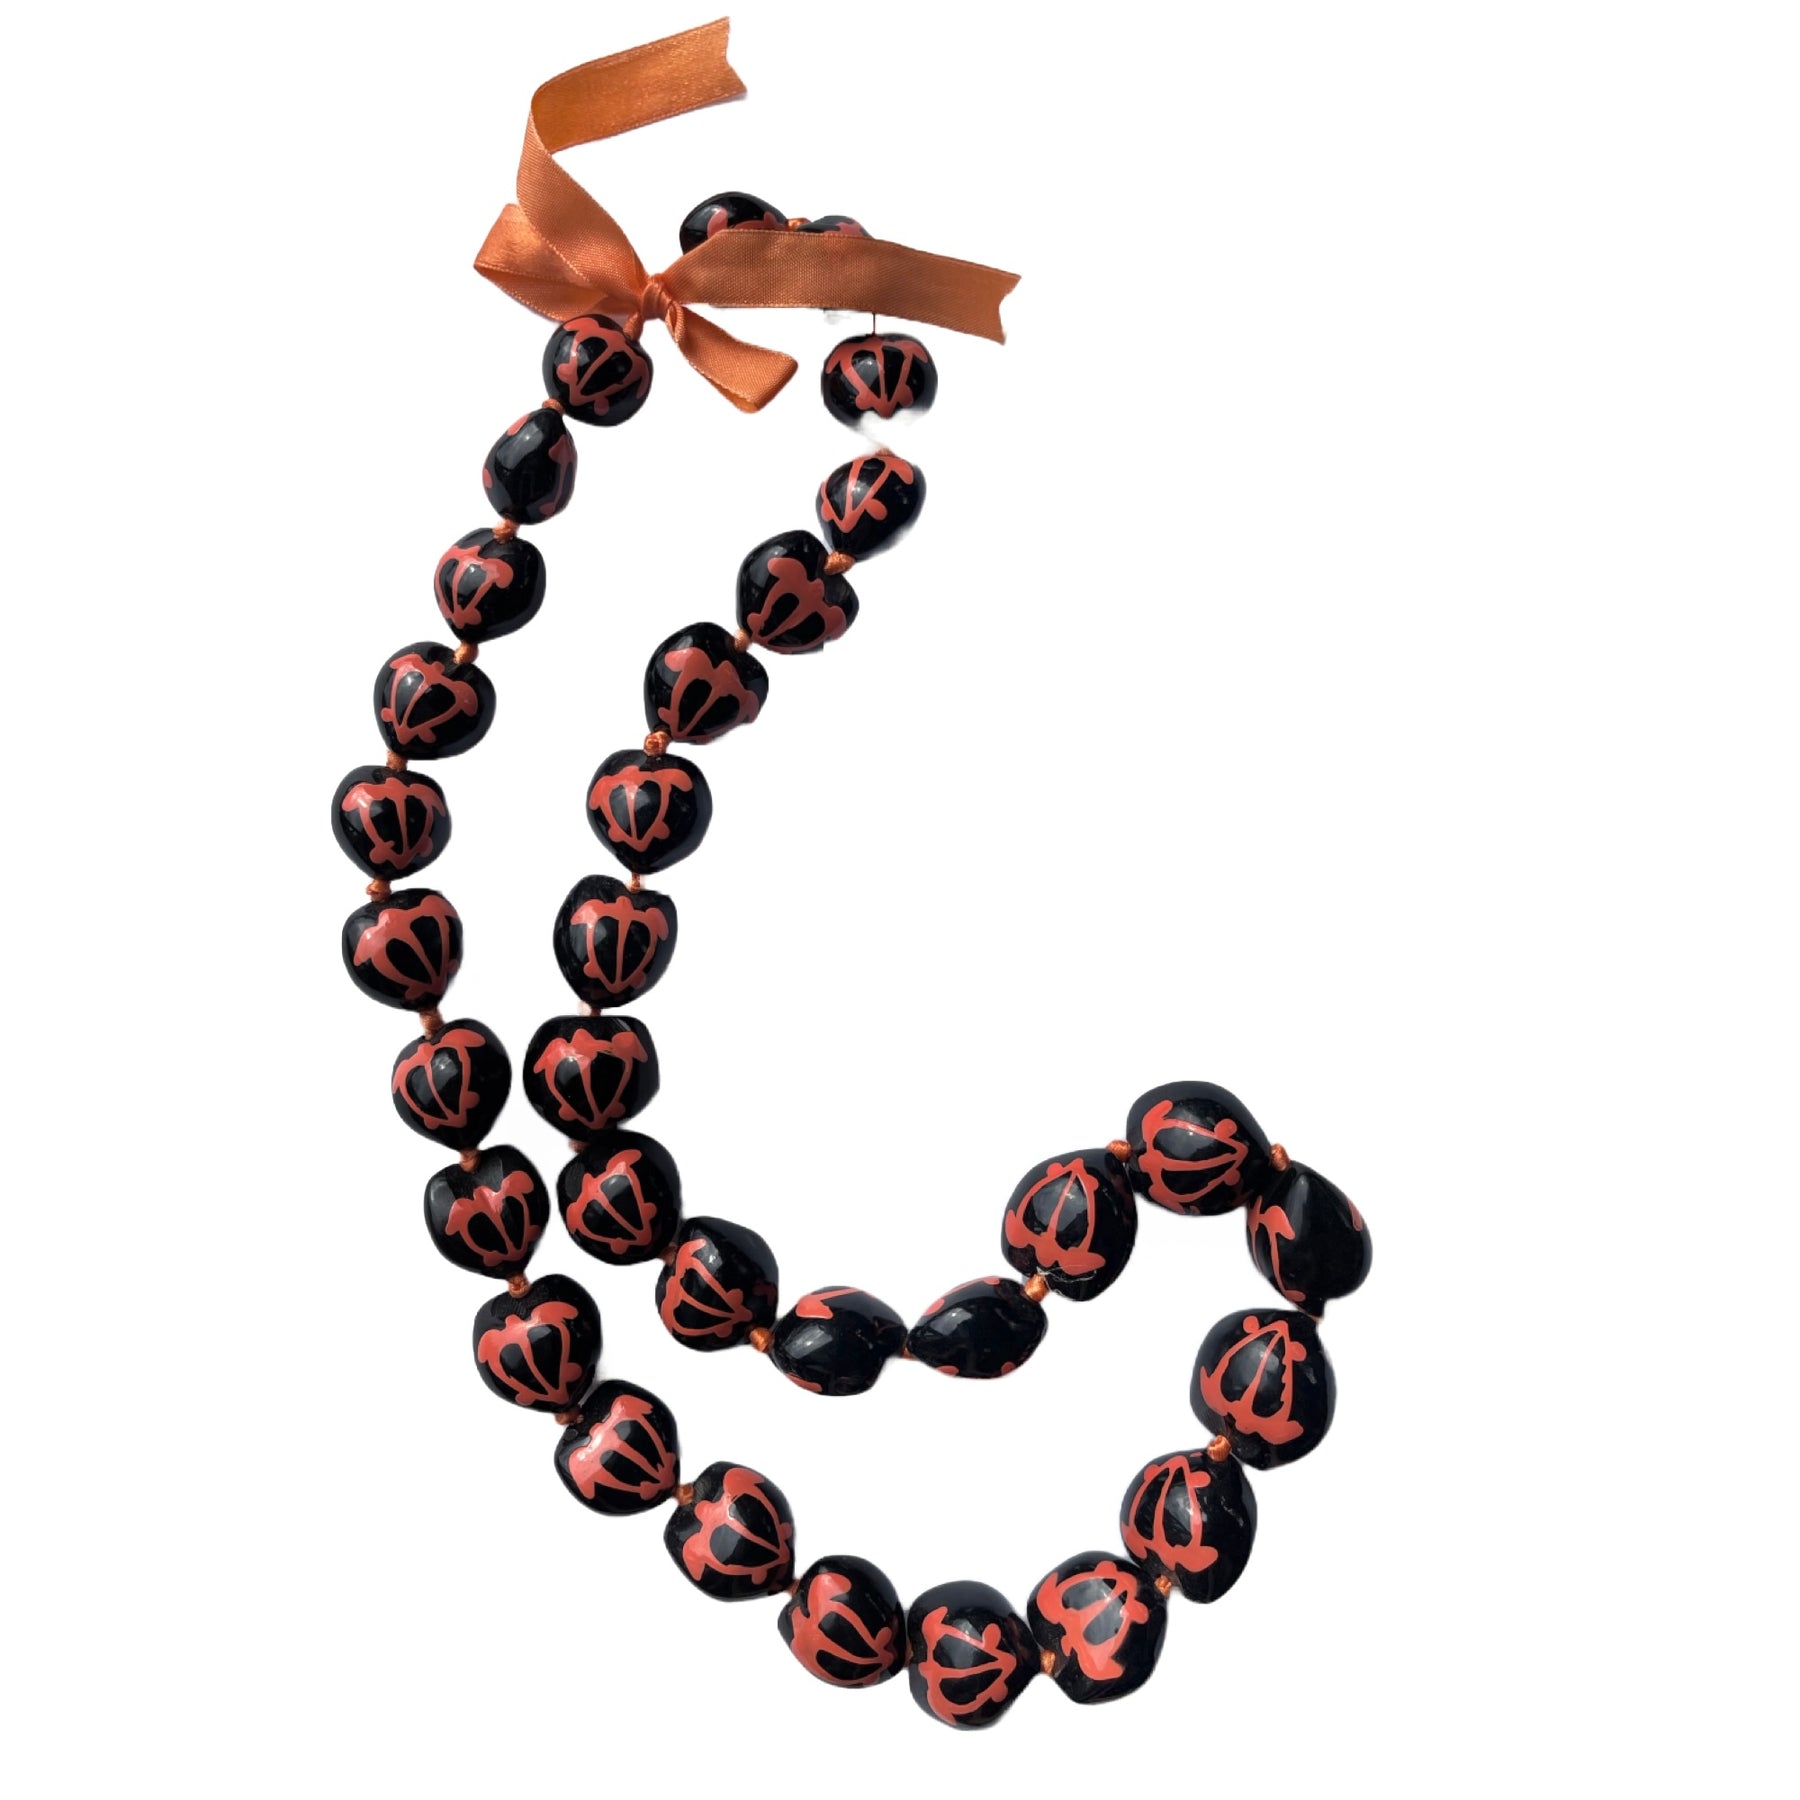 Kukui Nut Shell Lei (Tiger) - Hawaii Lei Stand - Lei Shipping & Delivery